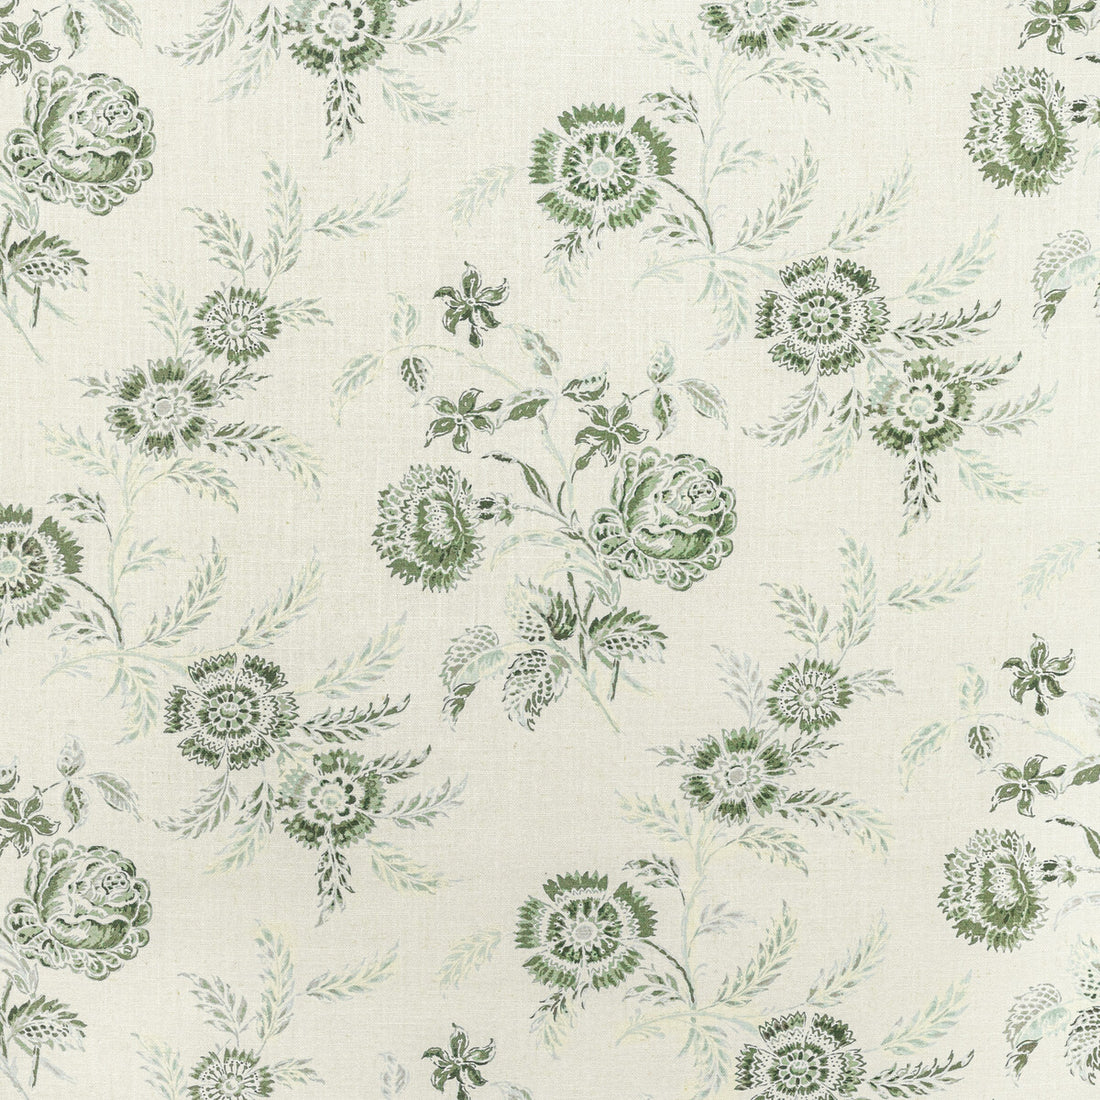 Boutique Floral fabric in celery color - pattern 2022101.3.0 - by Lee Jofa in the Sarah Bartholomew collection